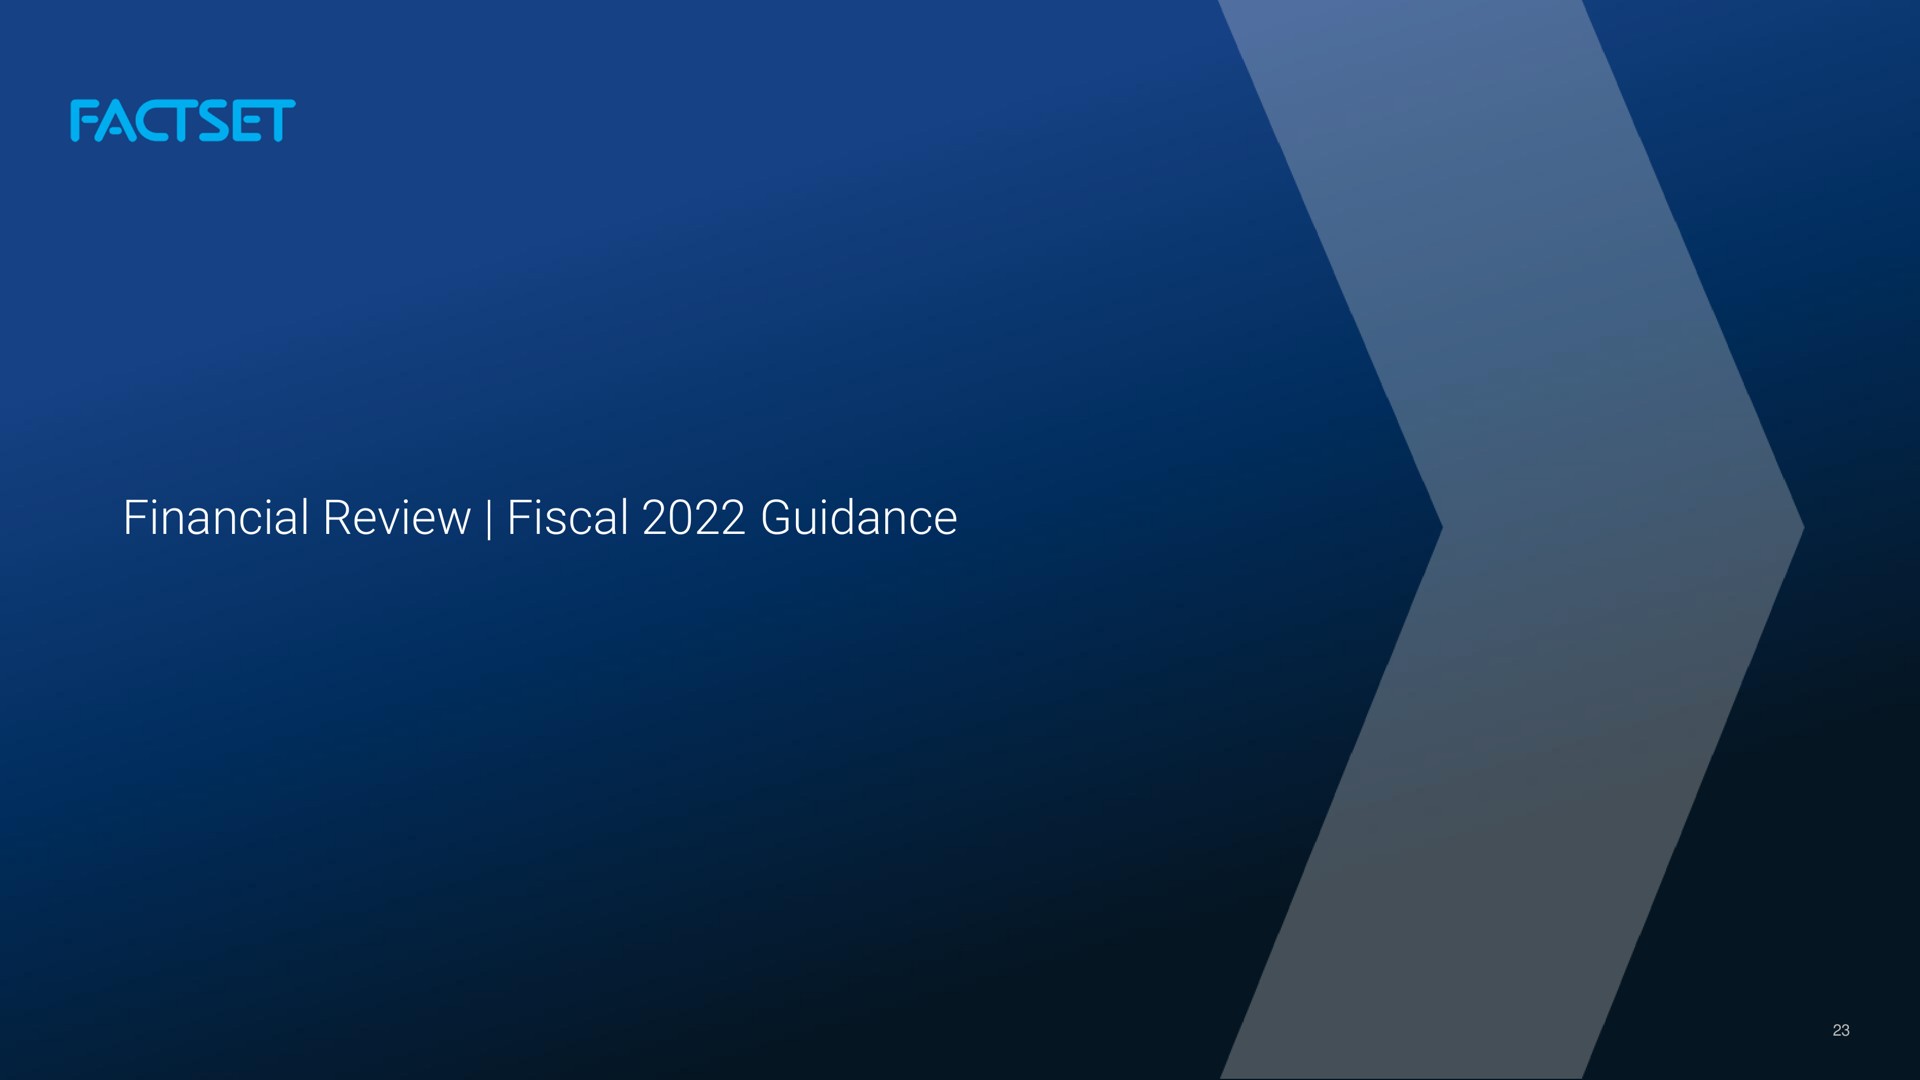 financial review fiscal guidance | Factset